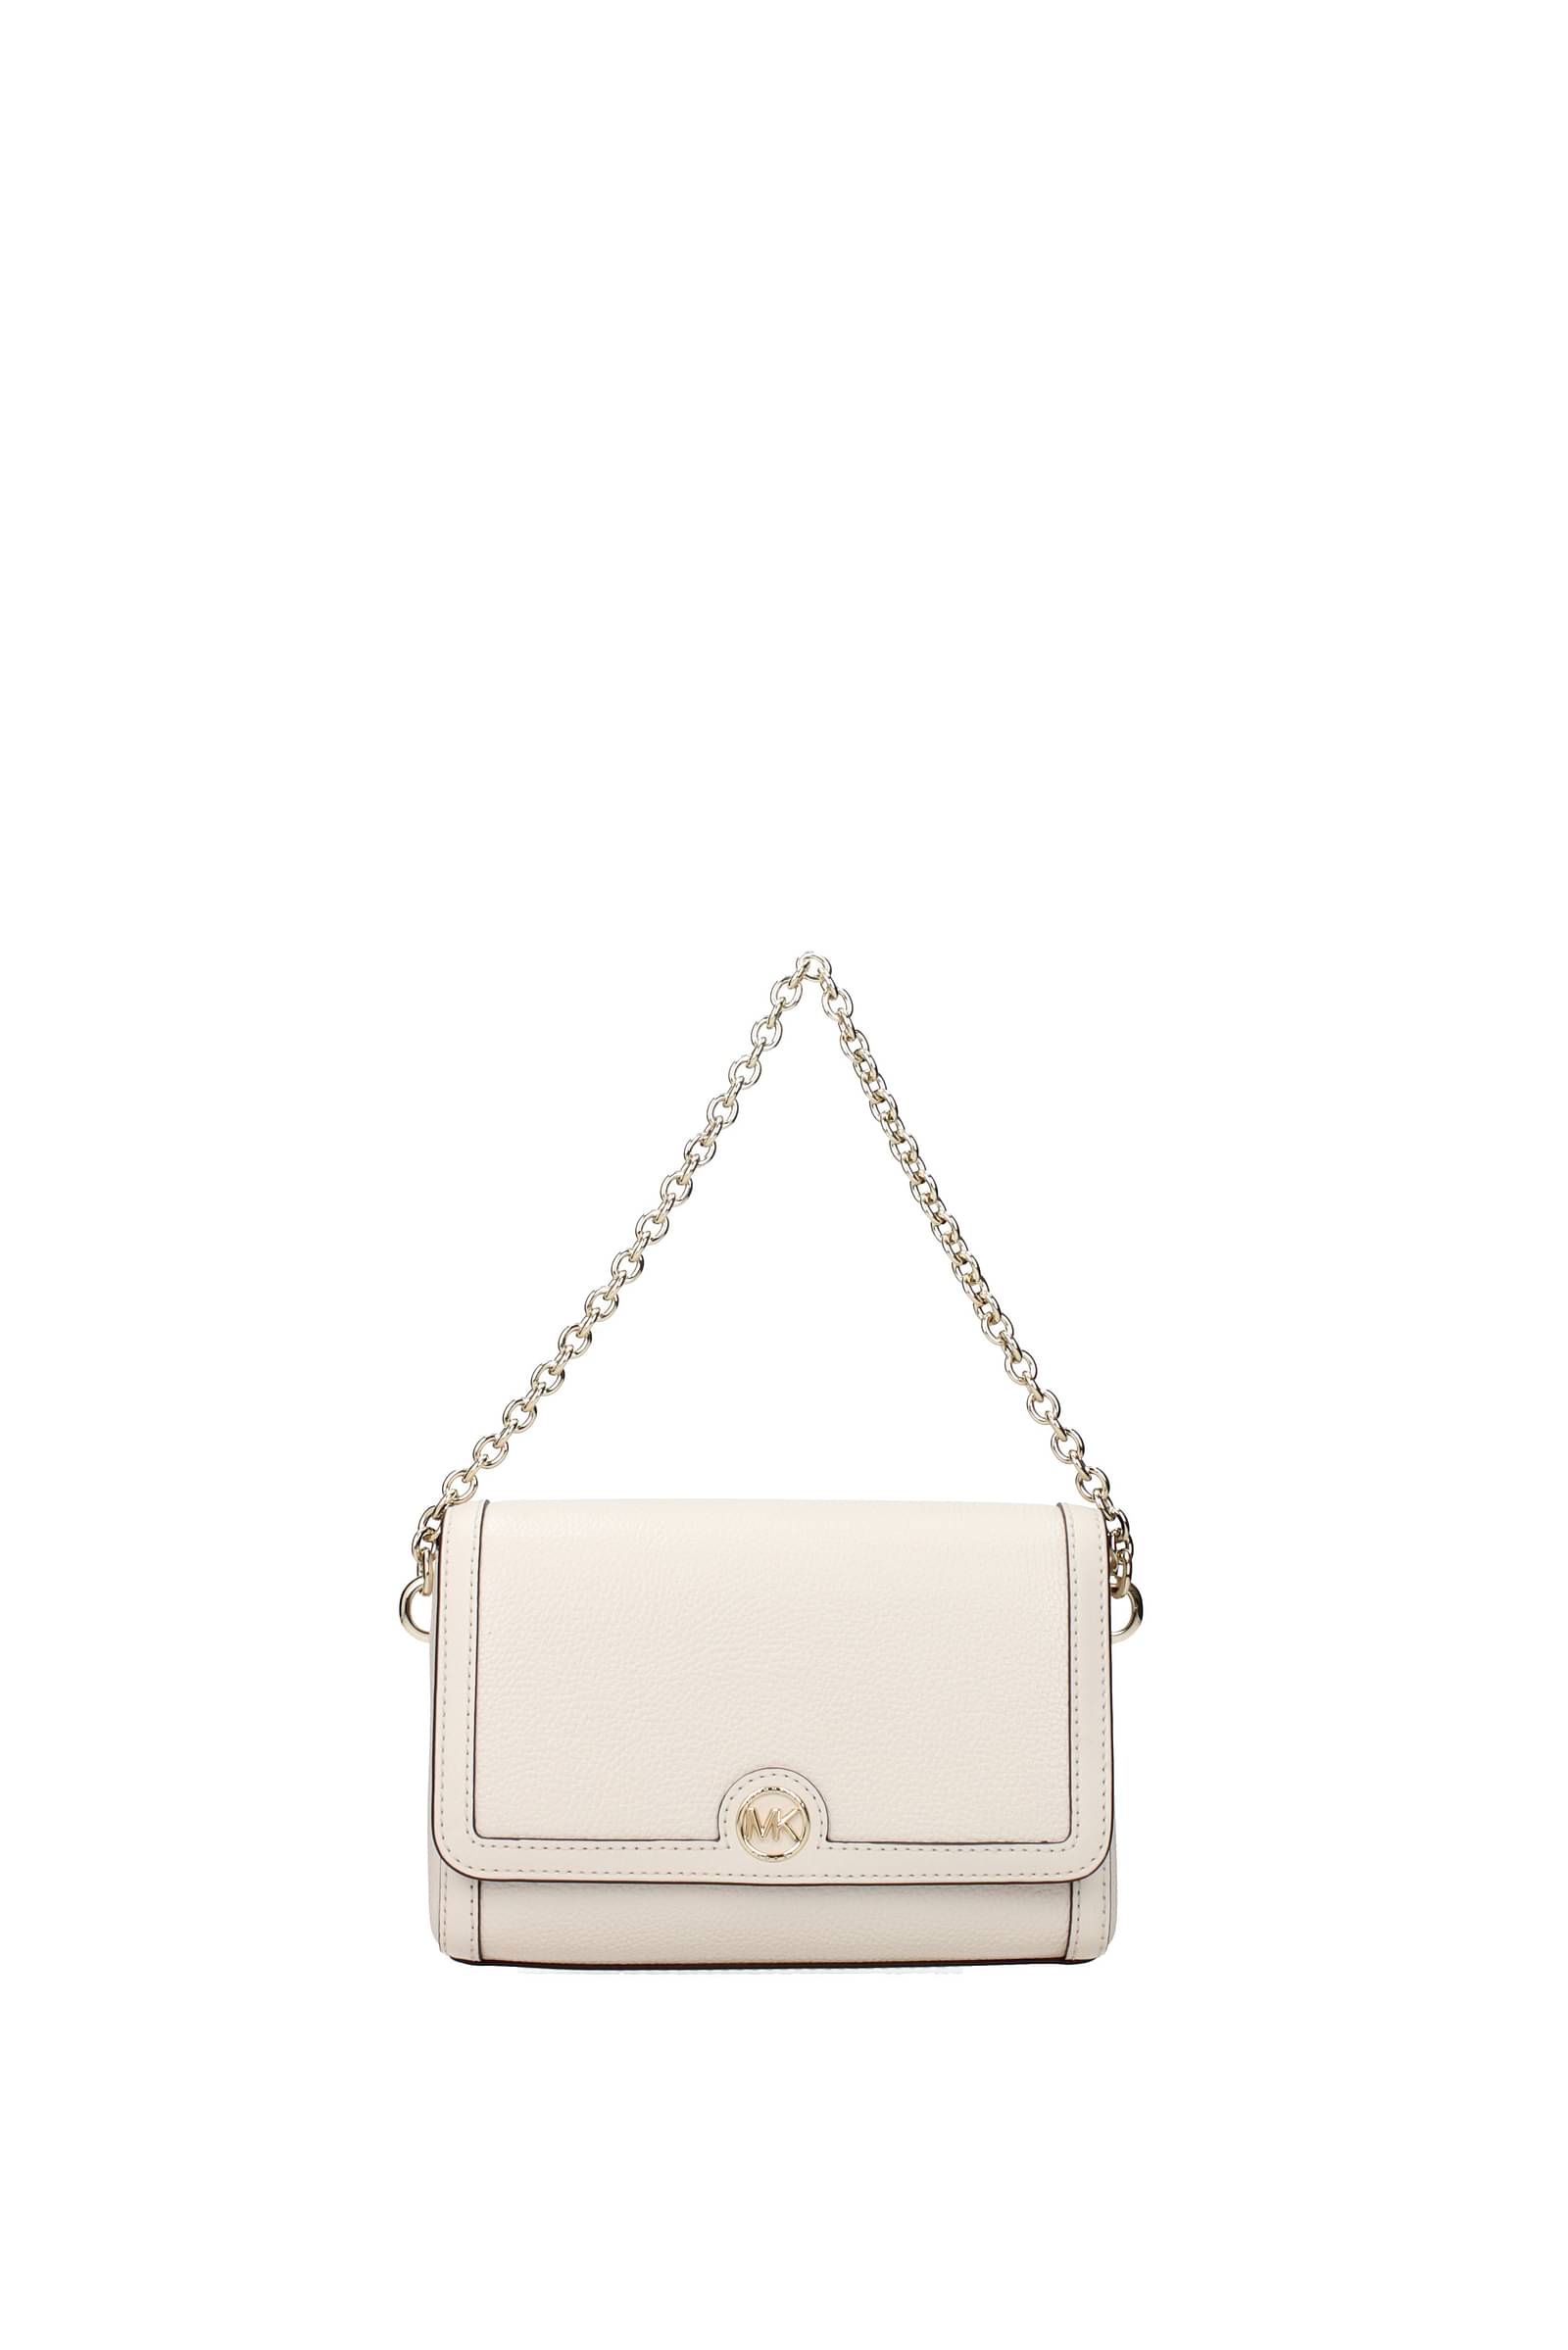 Michael Kors Sale | MK Bags Clearance | House Of Fraser